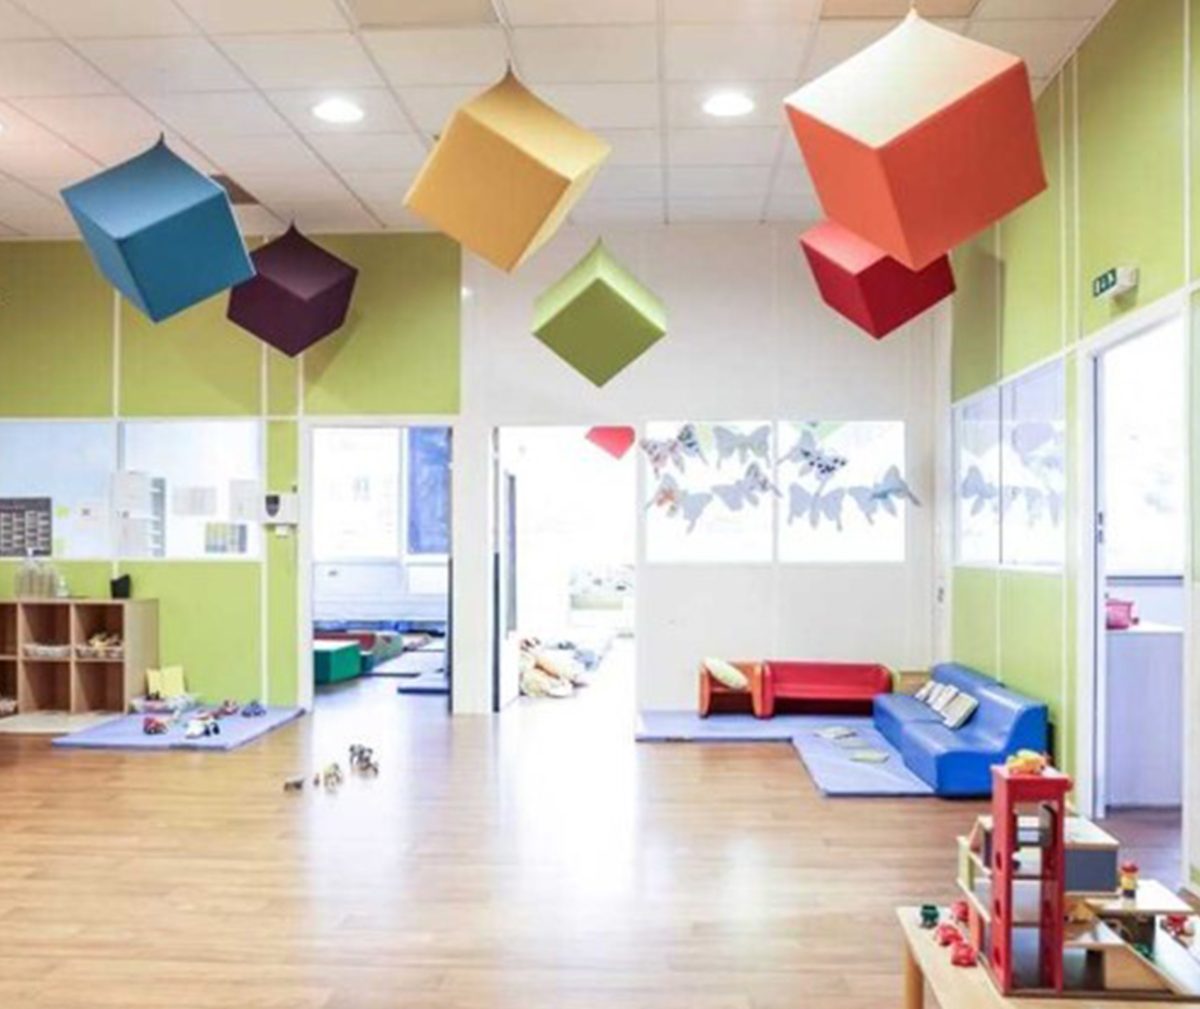 A colourful preschool reception, with blue, red, green, yellow and purple cubes hanging from the ceiling. The furniture is colourful and playful, with toys scattered throughout the room.